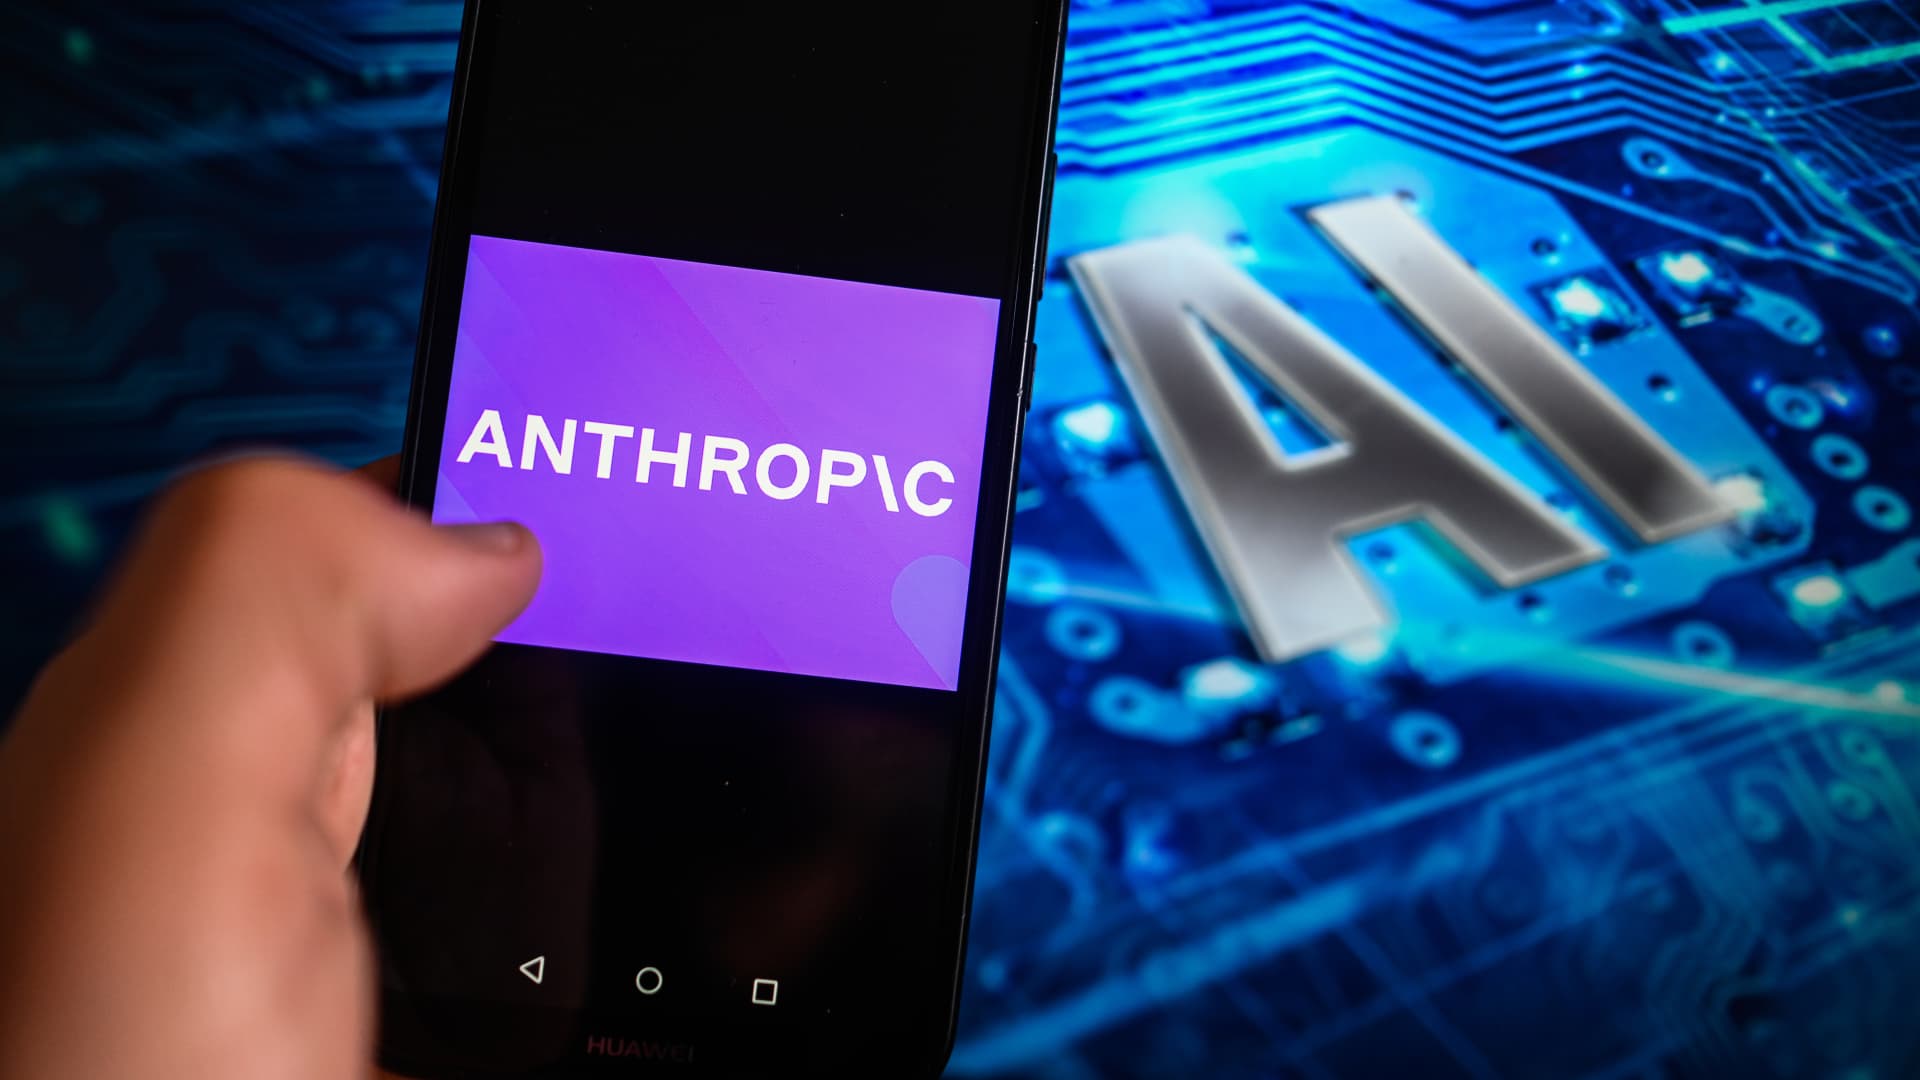 Amazon-backed Anthropic launches iPhone app and business tier to compete with OpenAI's ChatGPT